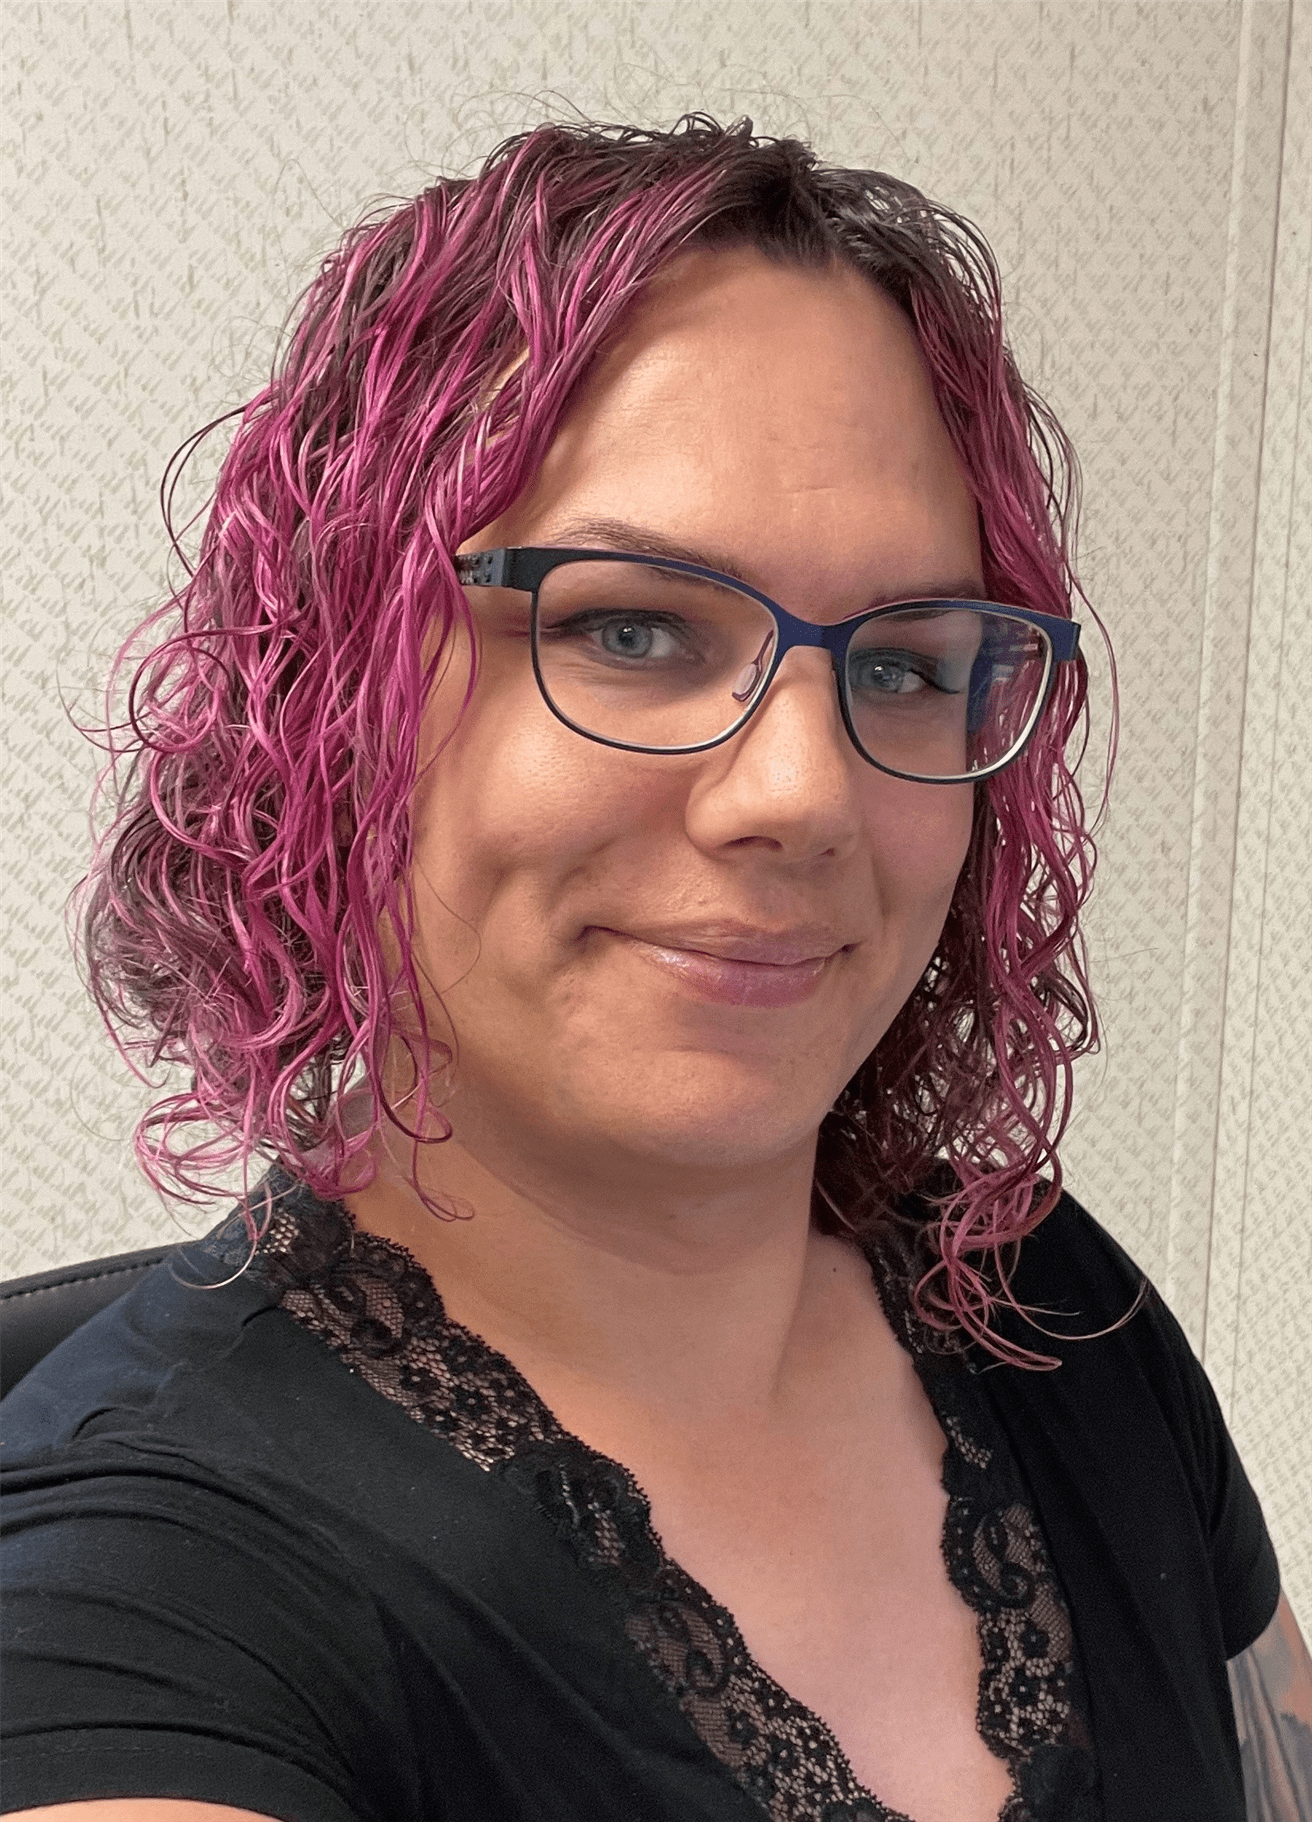 A woman with pink hair and glasses wearing a black shirt.